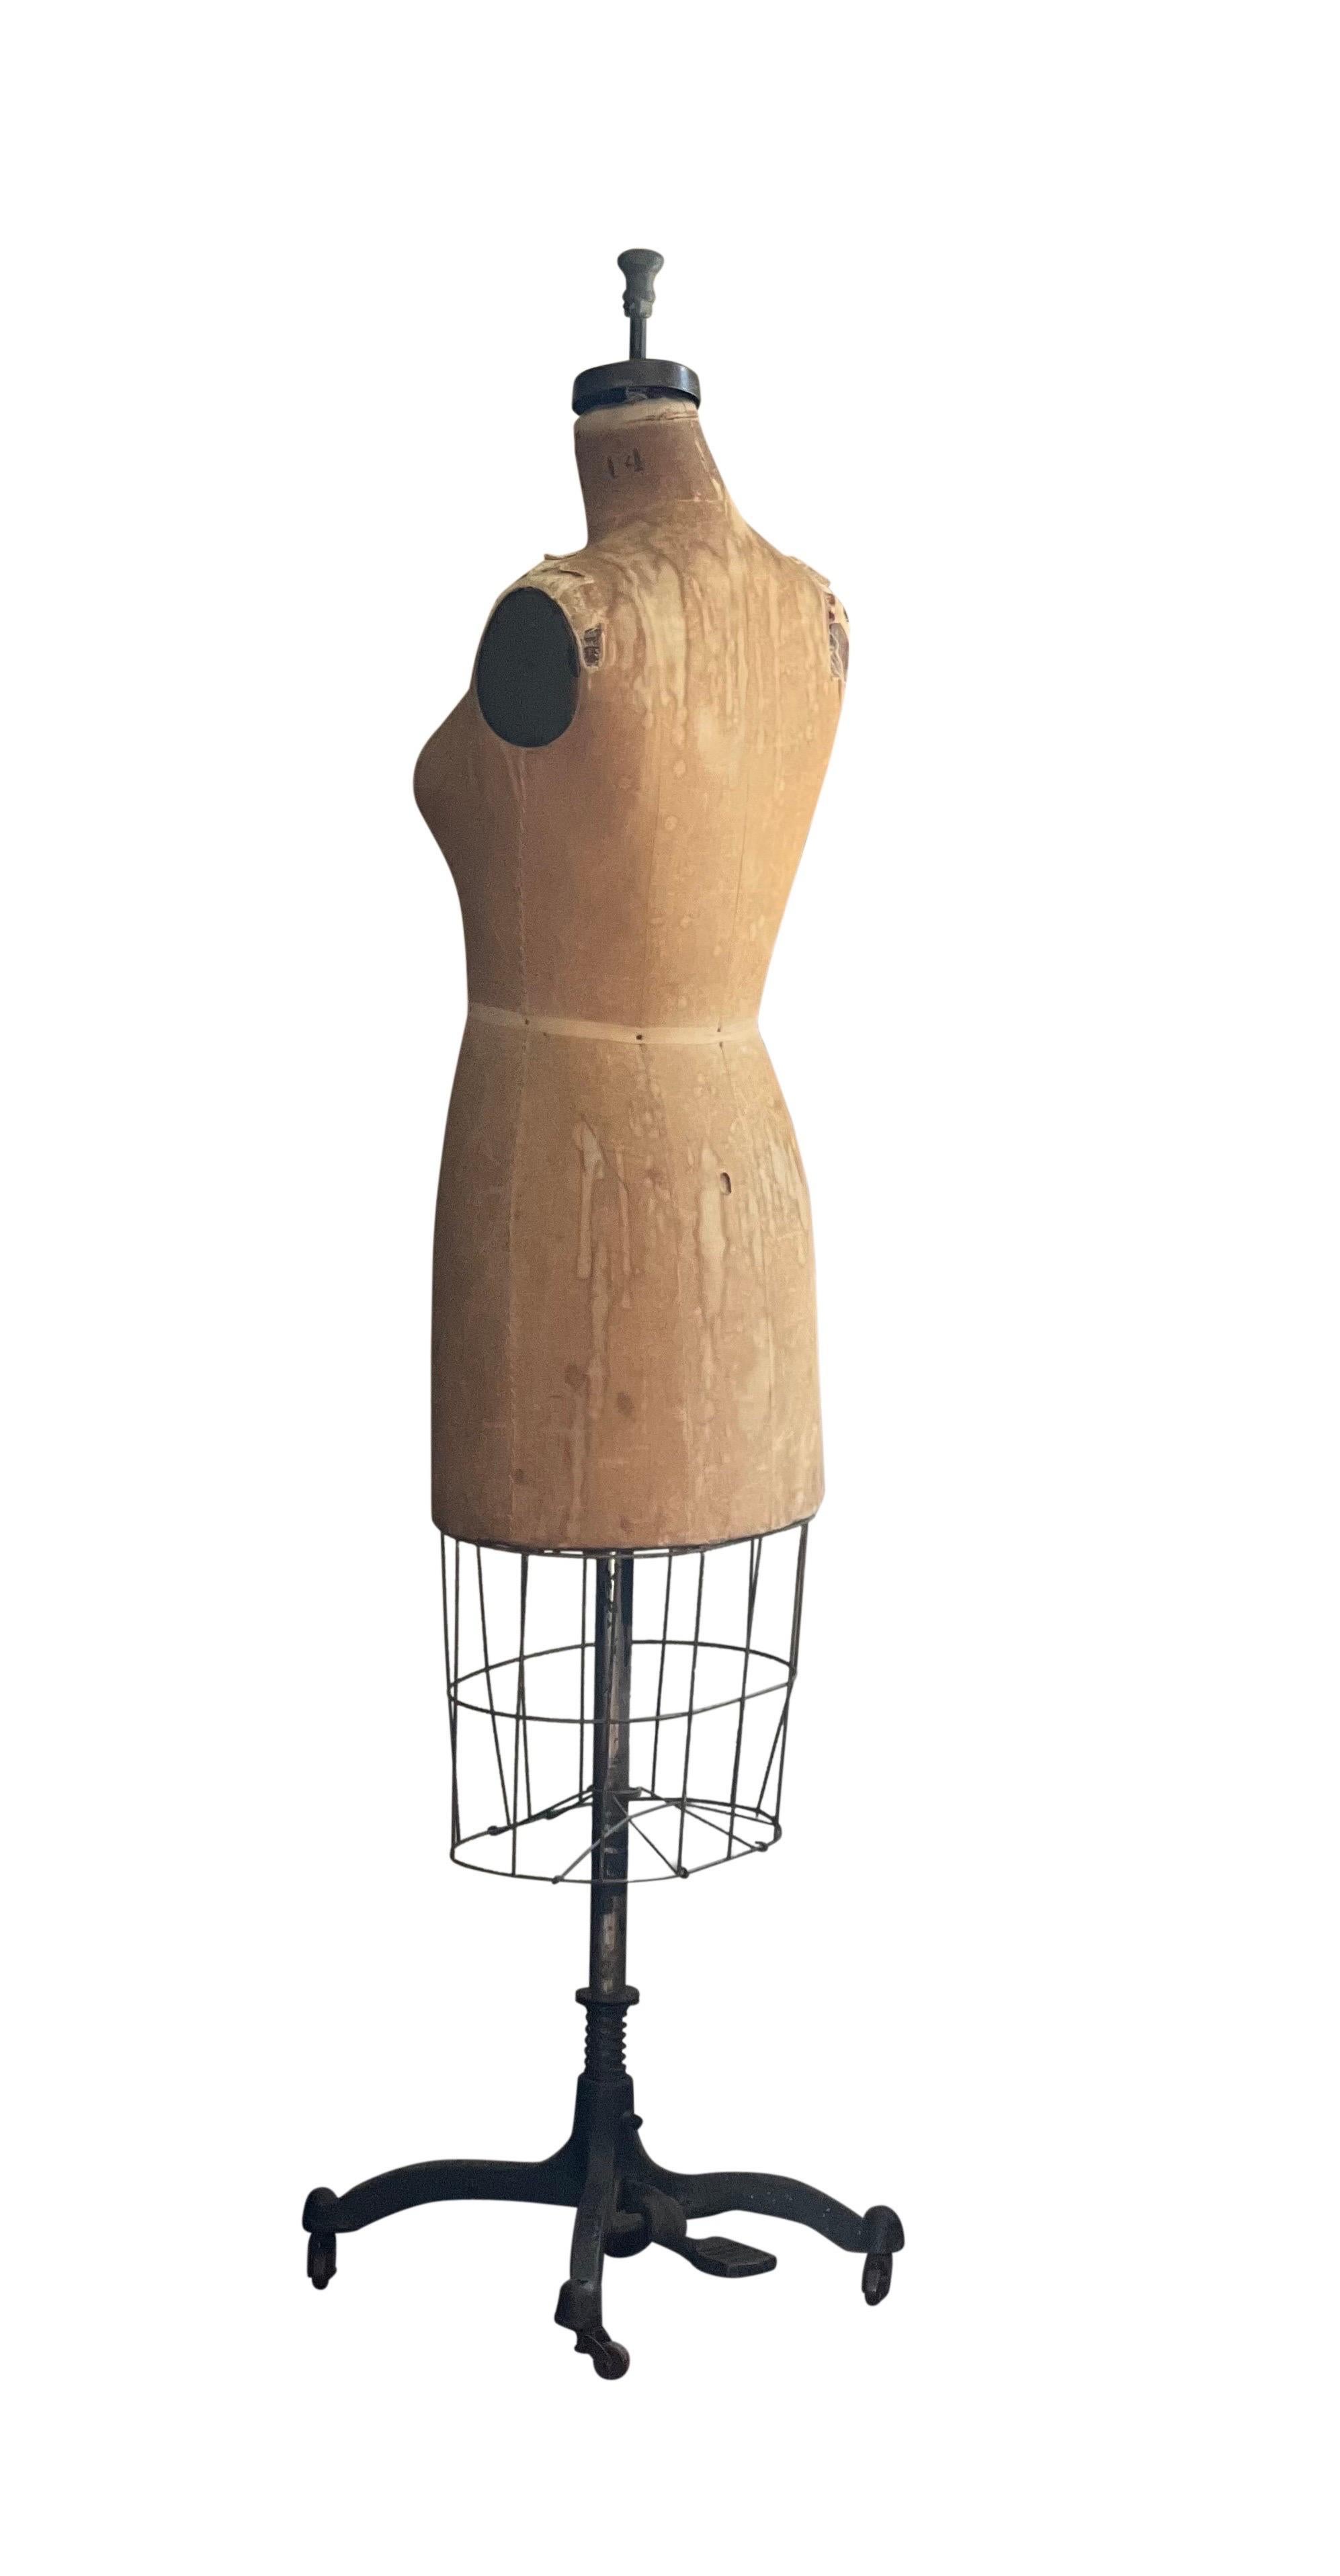 Vintage original Wolf 1956 dress form mannequin, New York.

Well worn Benjamin model dress form mannequin in size 14 on a cast iron base with casters. The form is wrapped in linen and layered with cotton batting over a papier-mâché base, machine